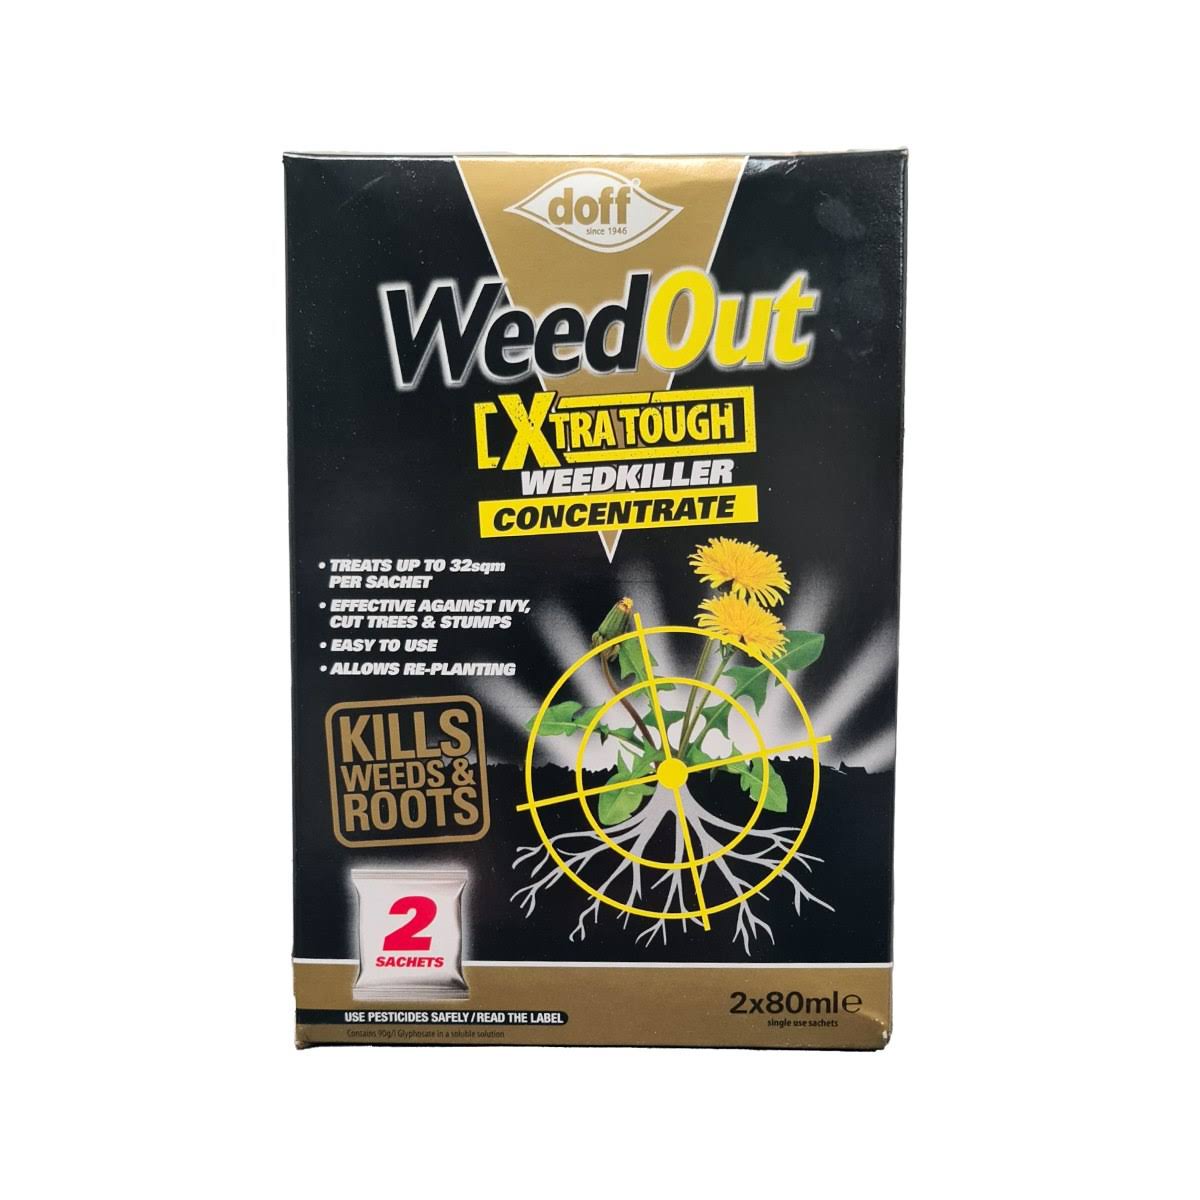 DOFF F-FC-002-DOF WeedOut Xtra Tough Weedkiller Concentrate 2 x Sachets